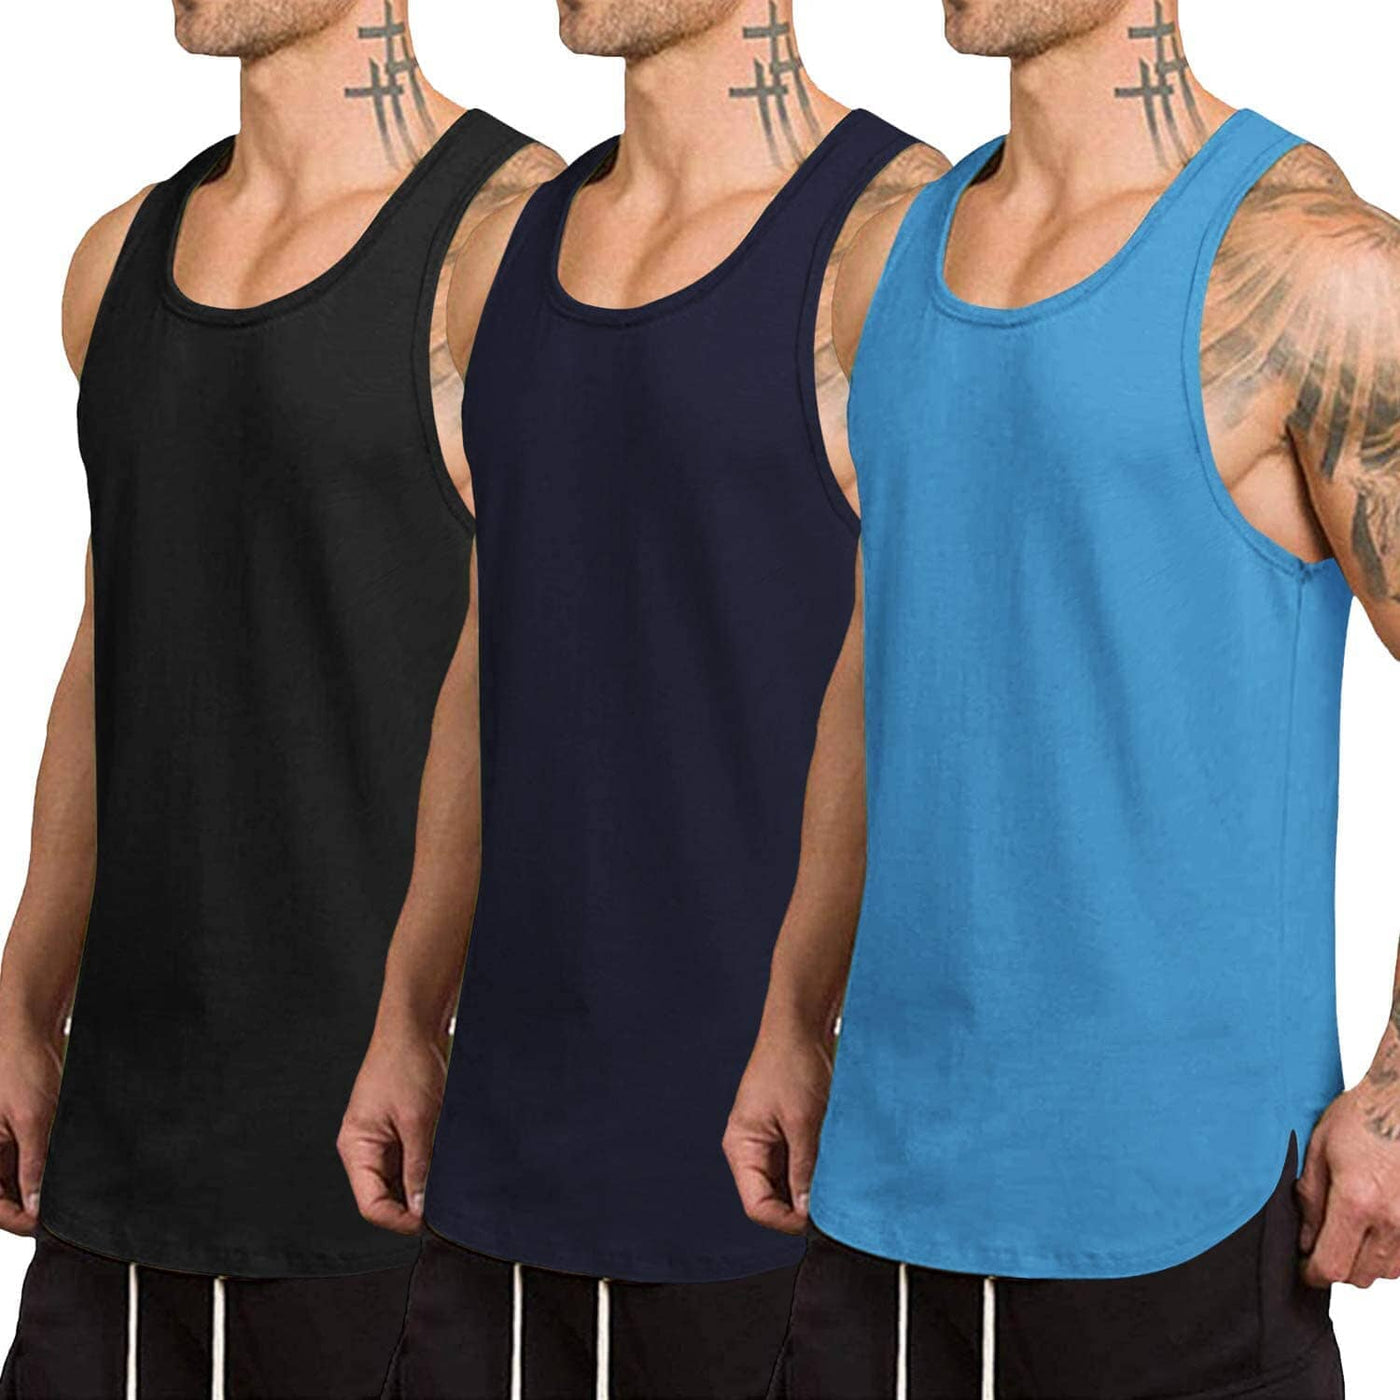 Coofandy 3-Pack Quick Dry Gym Vest (US Only) Tank Tops coofandy Black /Navy Blue /Blue S 